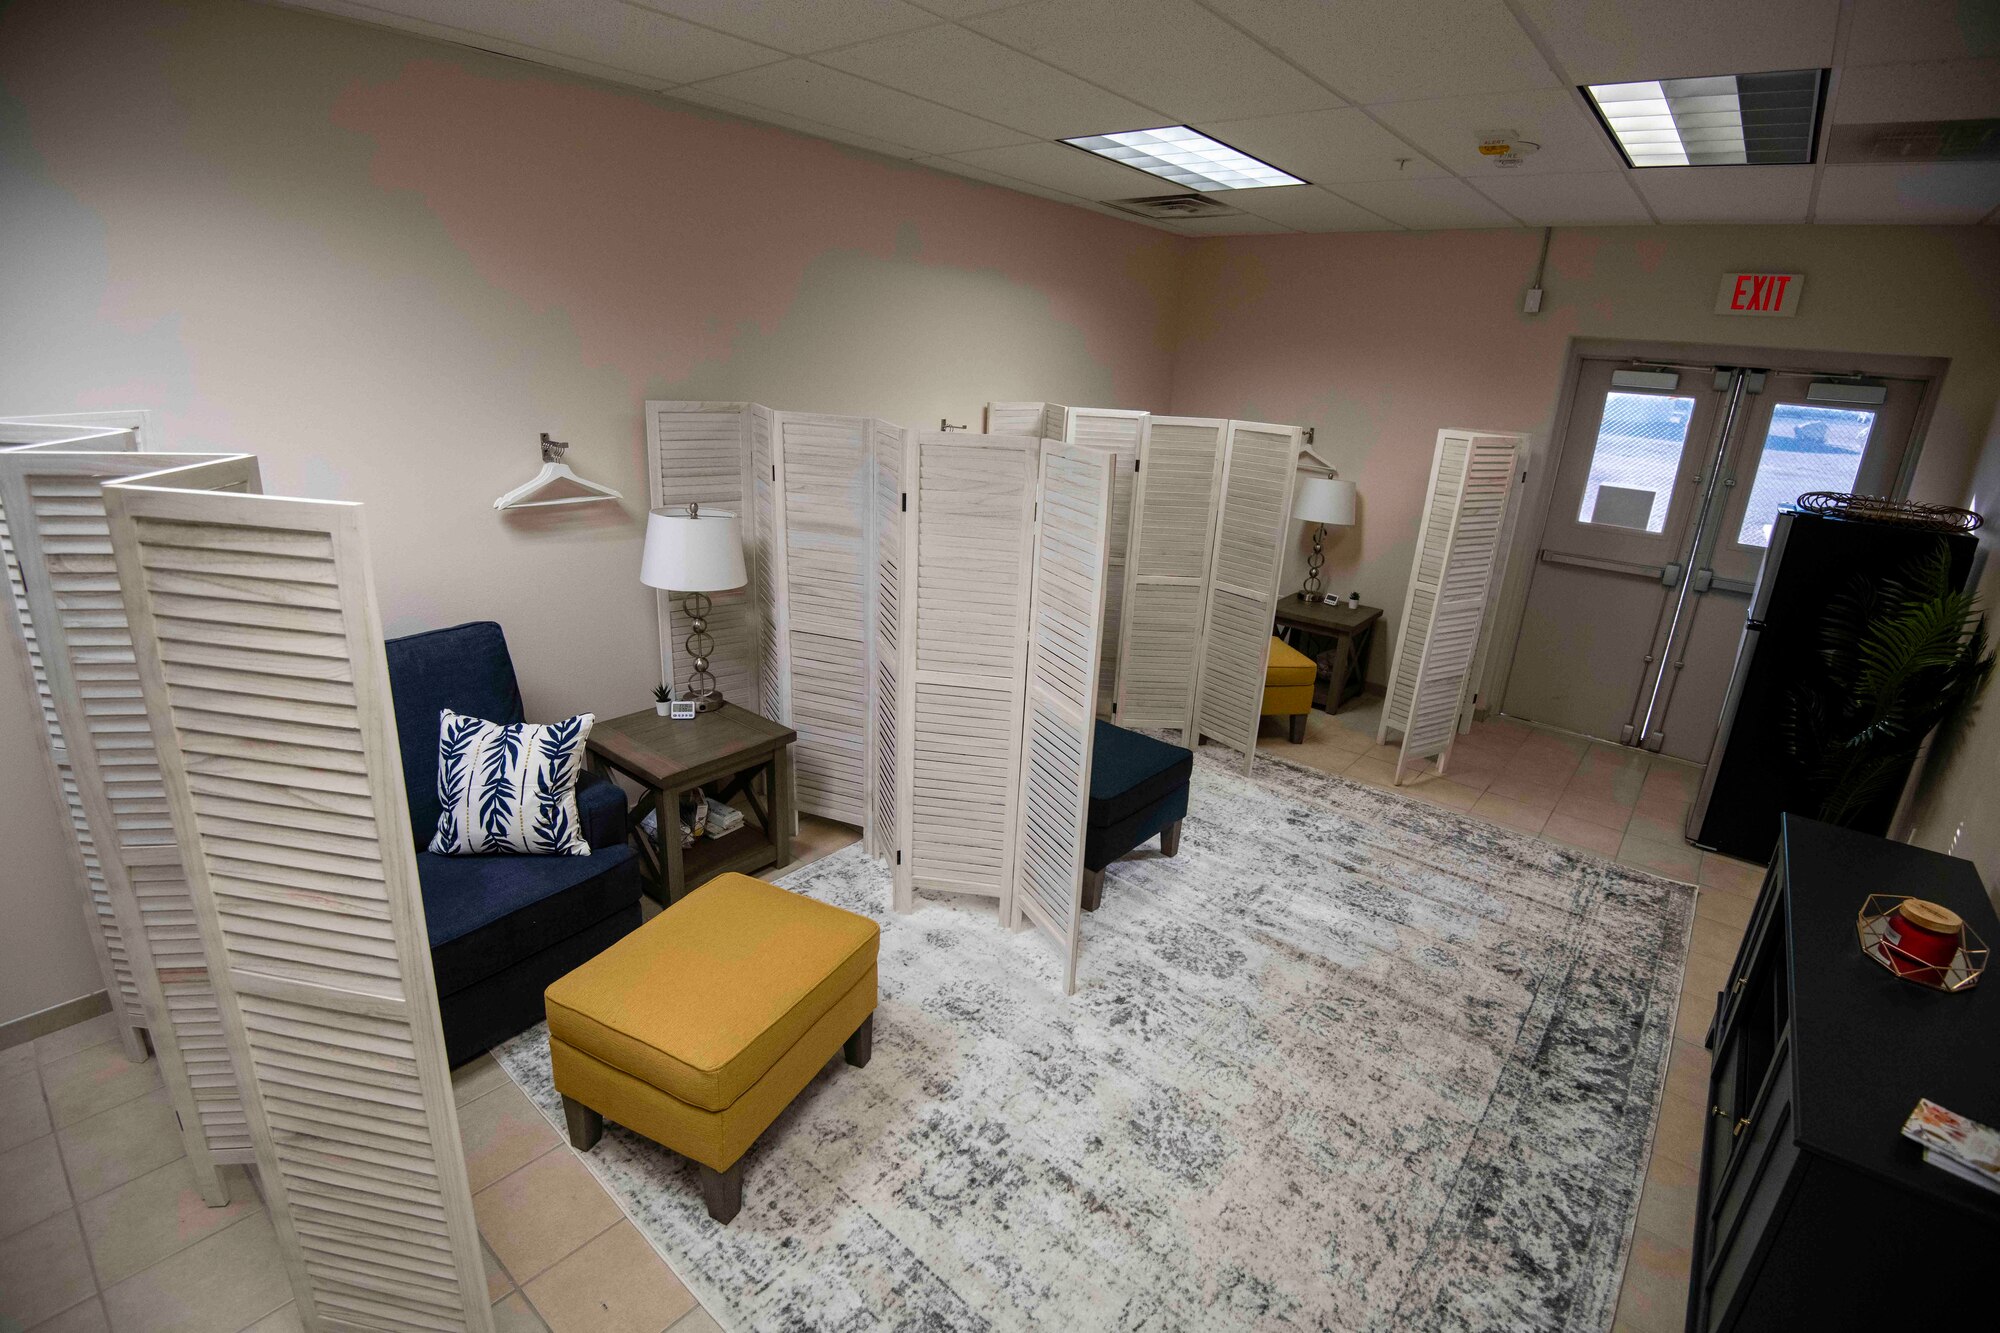 The new mother’s room can fit up to three mothers at a time while adhering to social distancing and also meets the mandated requirements for the Air Force’s requirement of lactation rooms for nursing mothers.